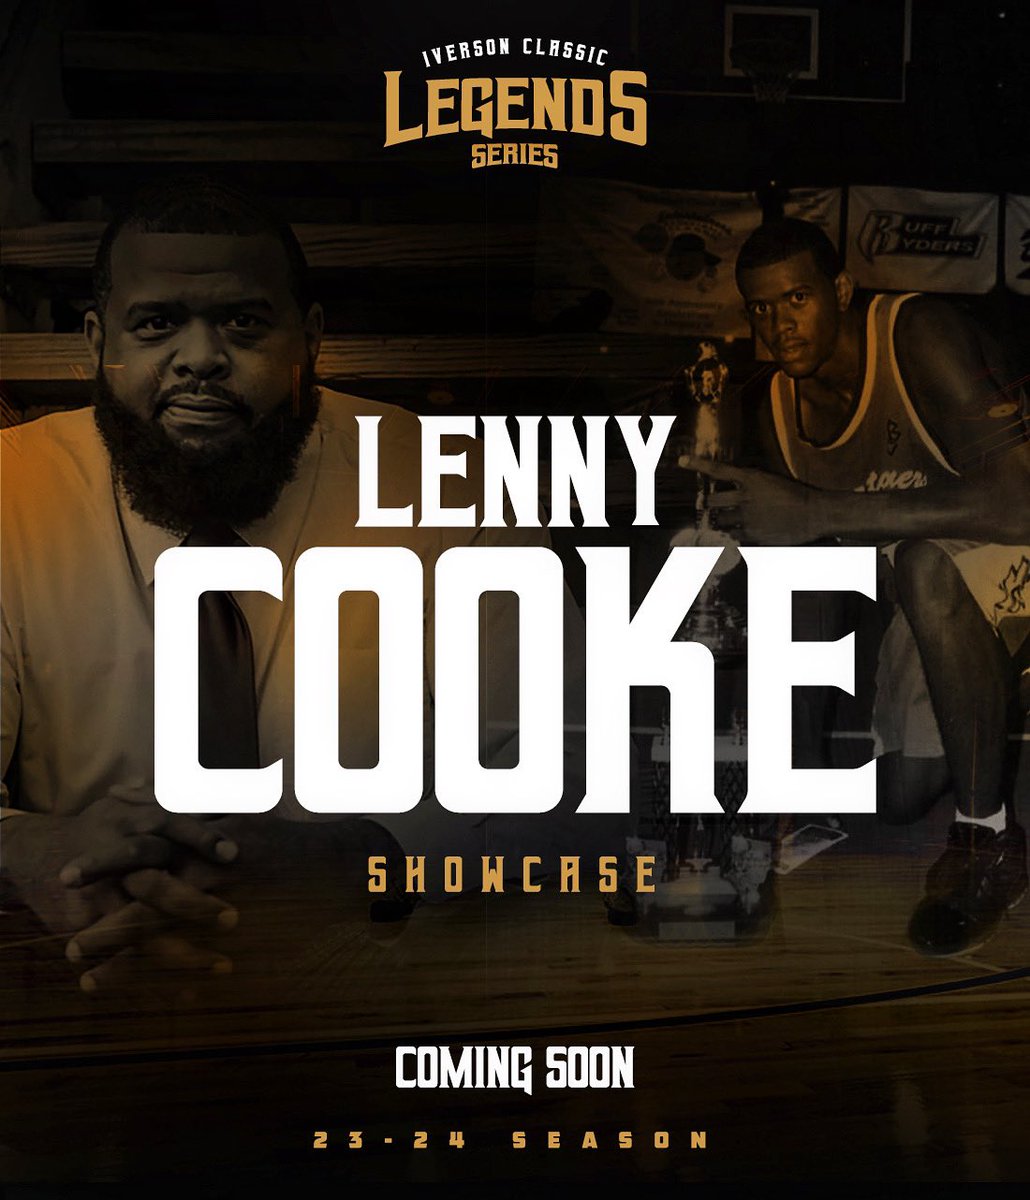 A new chapter in the Iverson Classic legacy is about to begin. The Legends Series of elite events celebrating and hosted by hoops legends will begin this coming season with the one and only Lenny Cooke.

Coming for the 2023/2024 season.